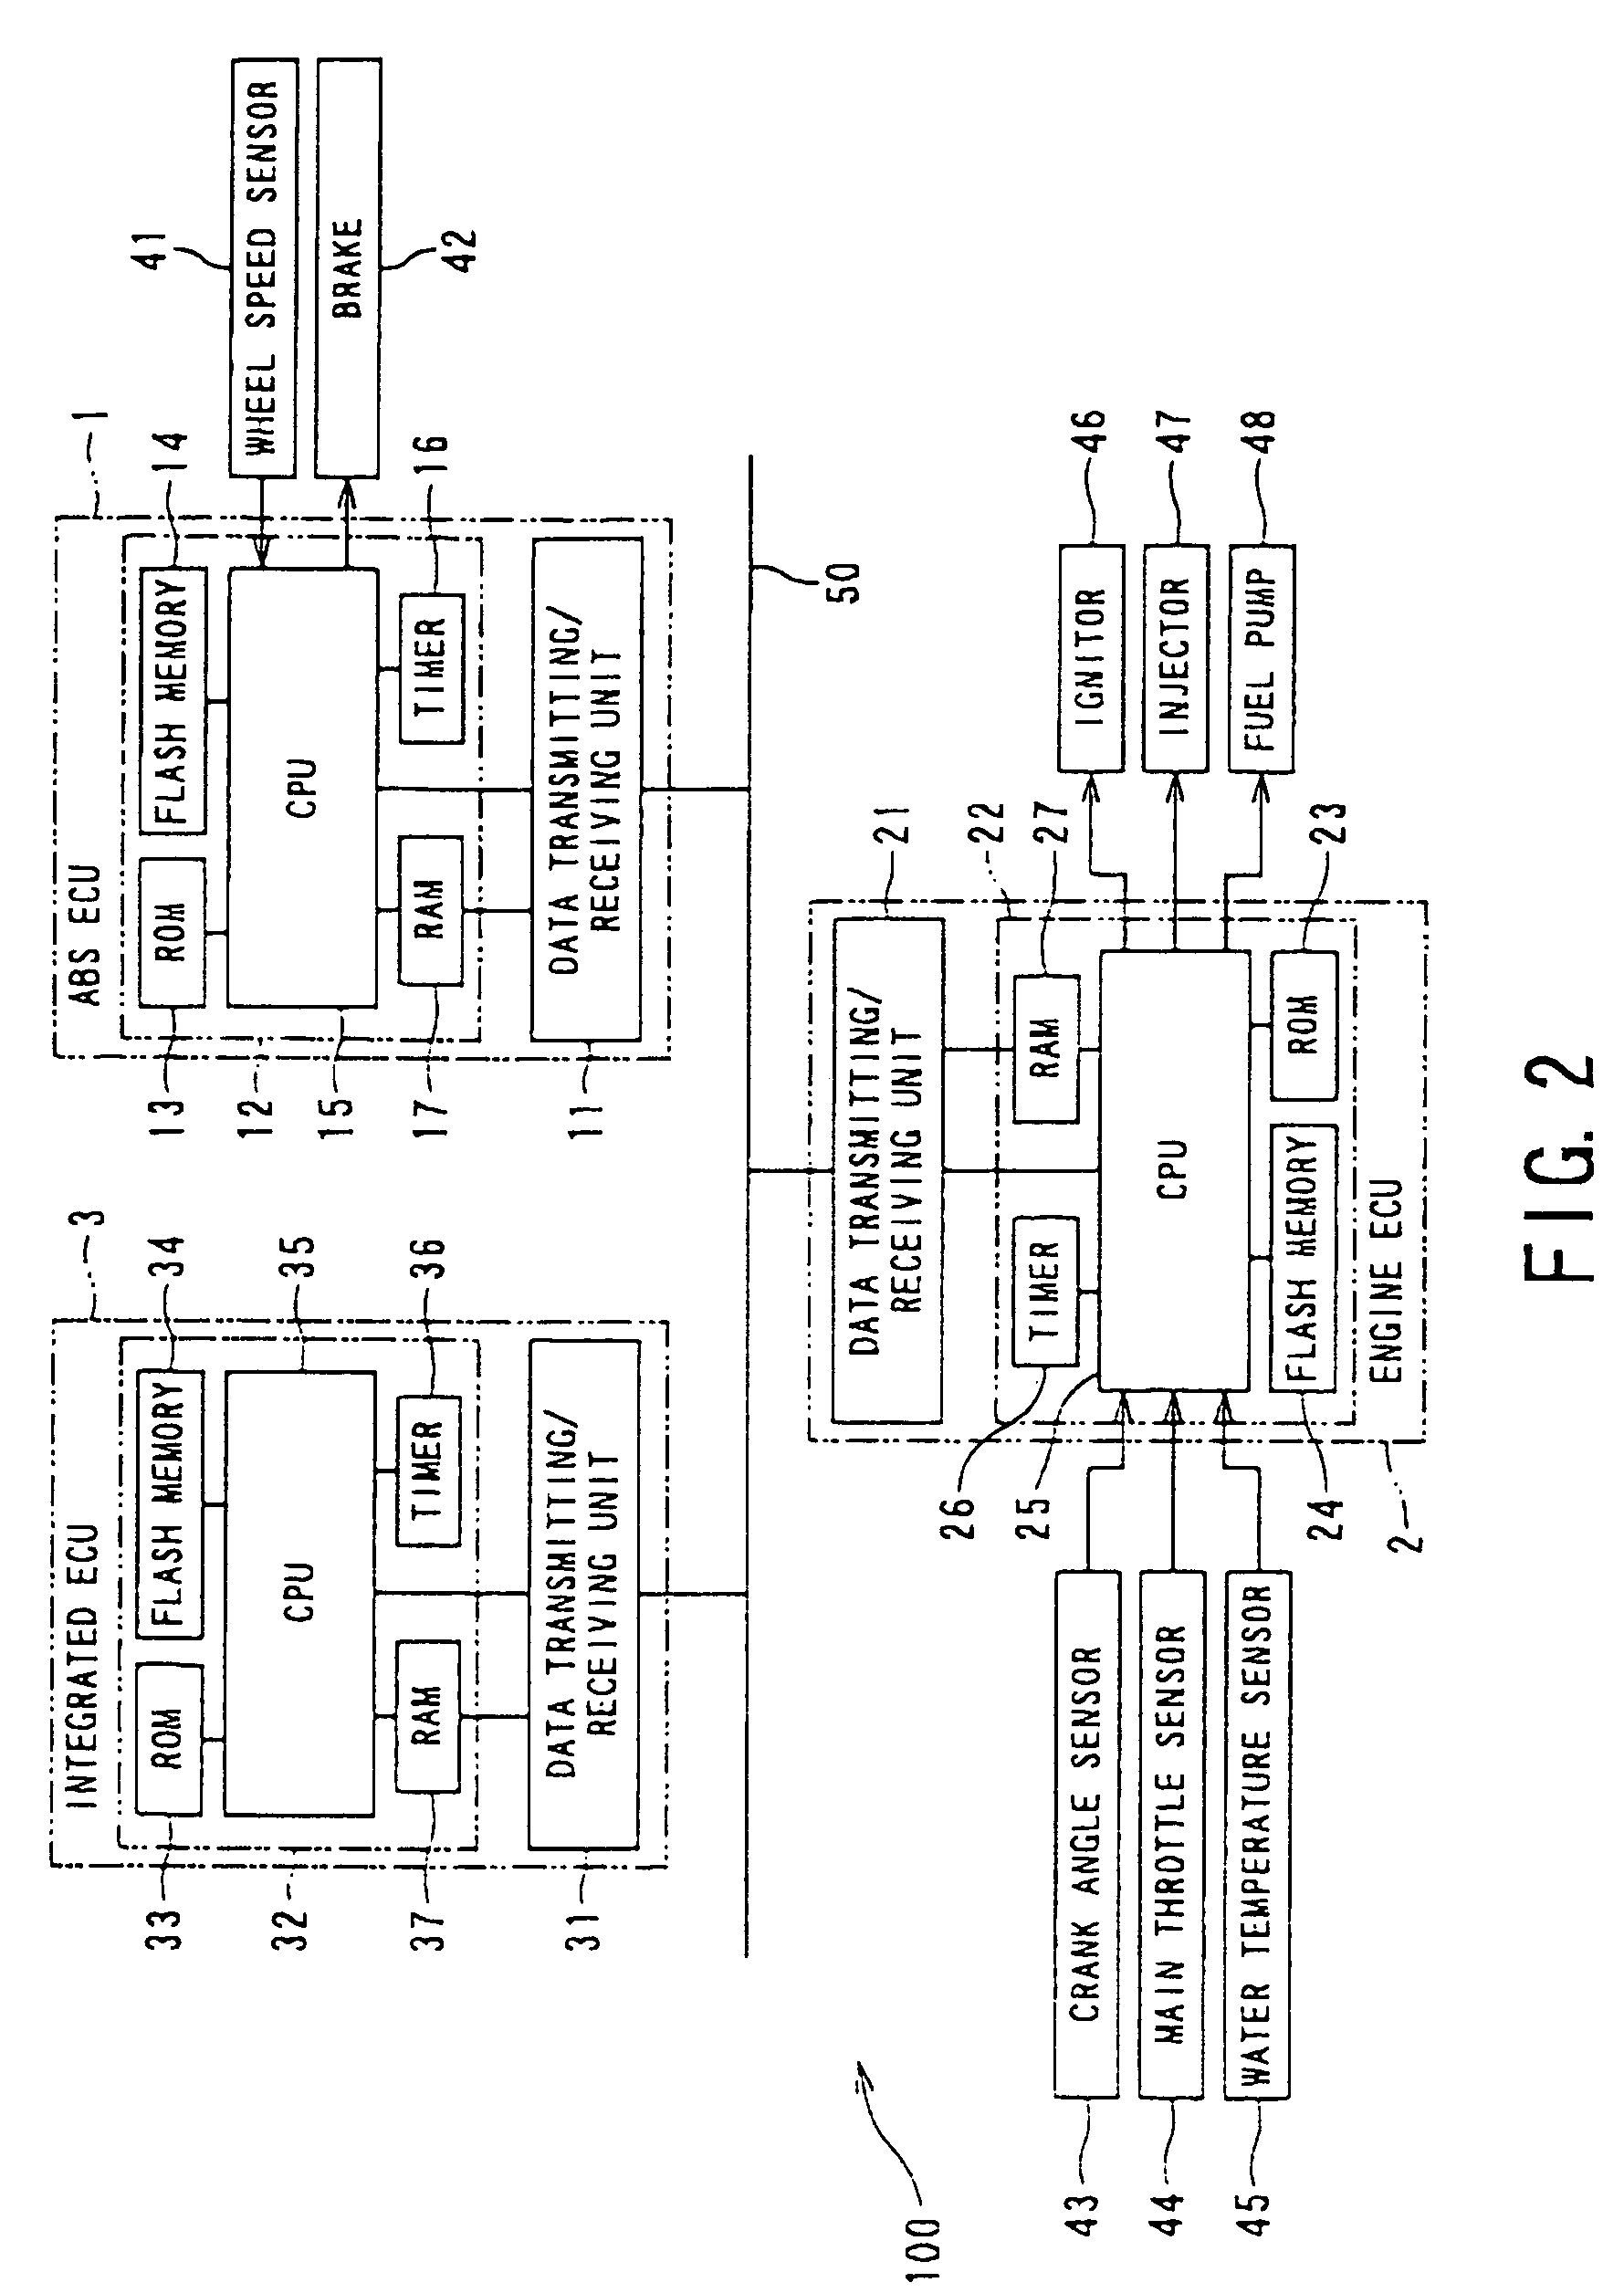 Method and system for controlling behaviors of vehicle